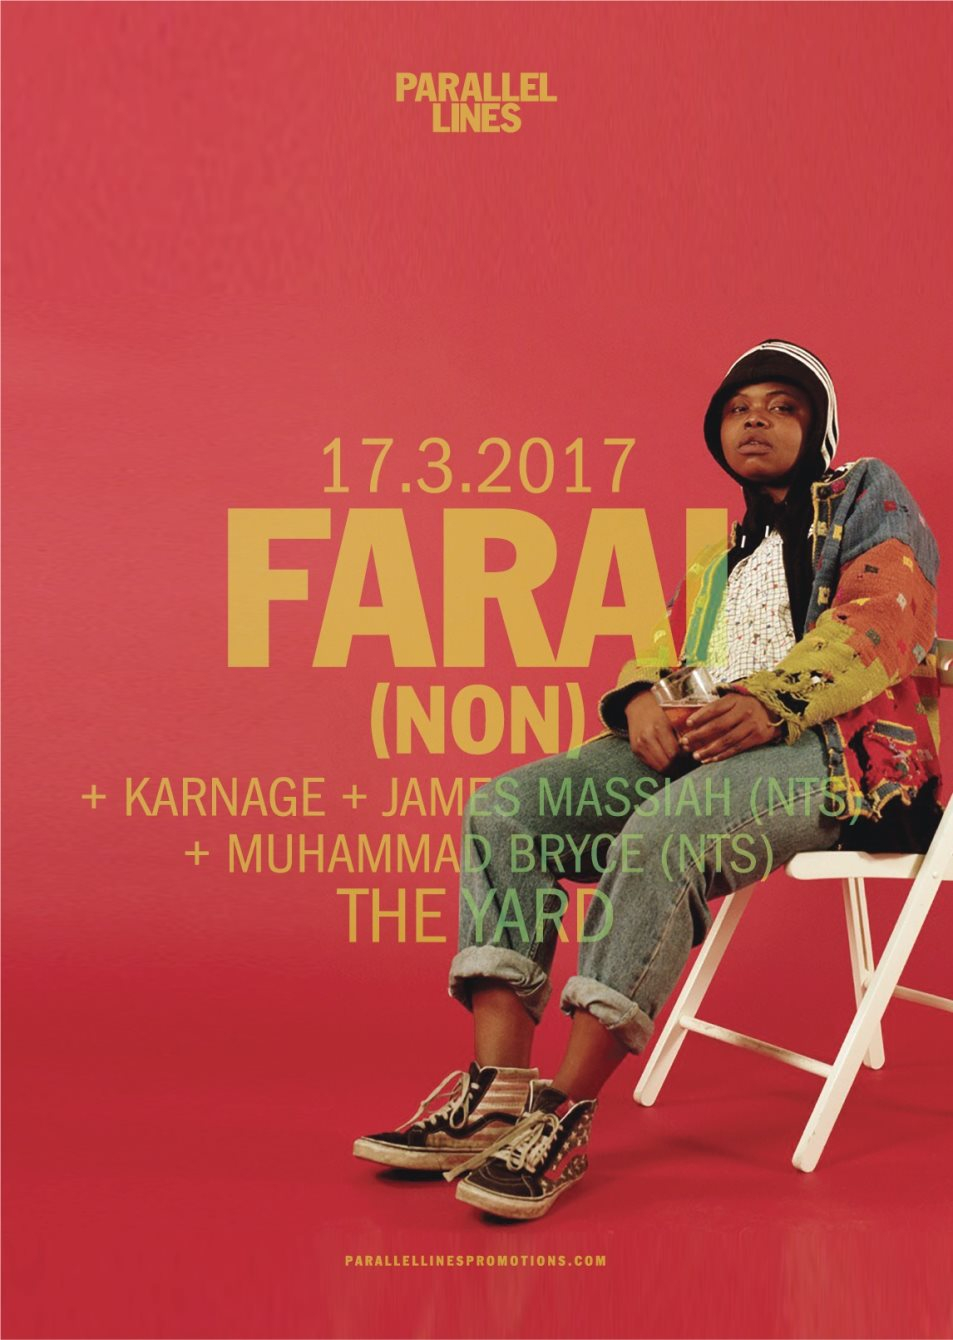 Farai (NON) EP Launch with Karnage, James Massiah (NTS) Muhammad Bryce (NTS), Visuals & More - Flyer front